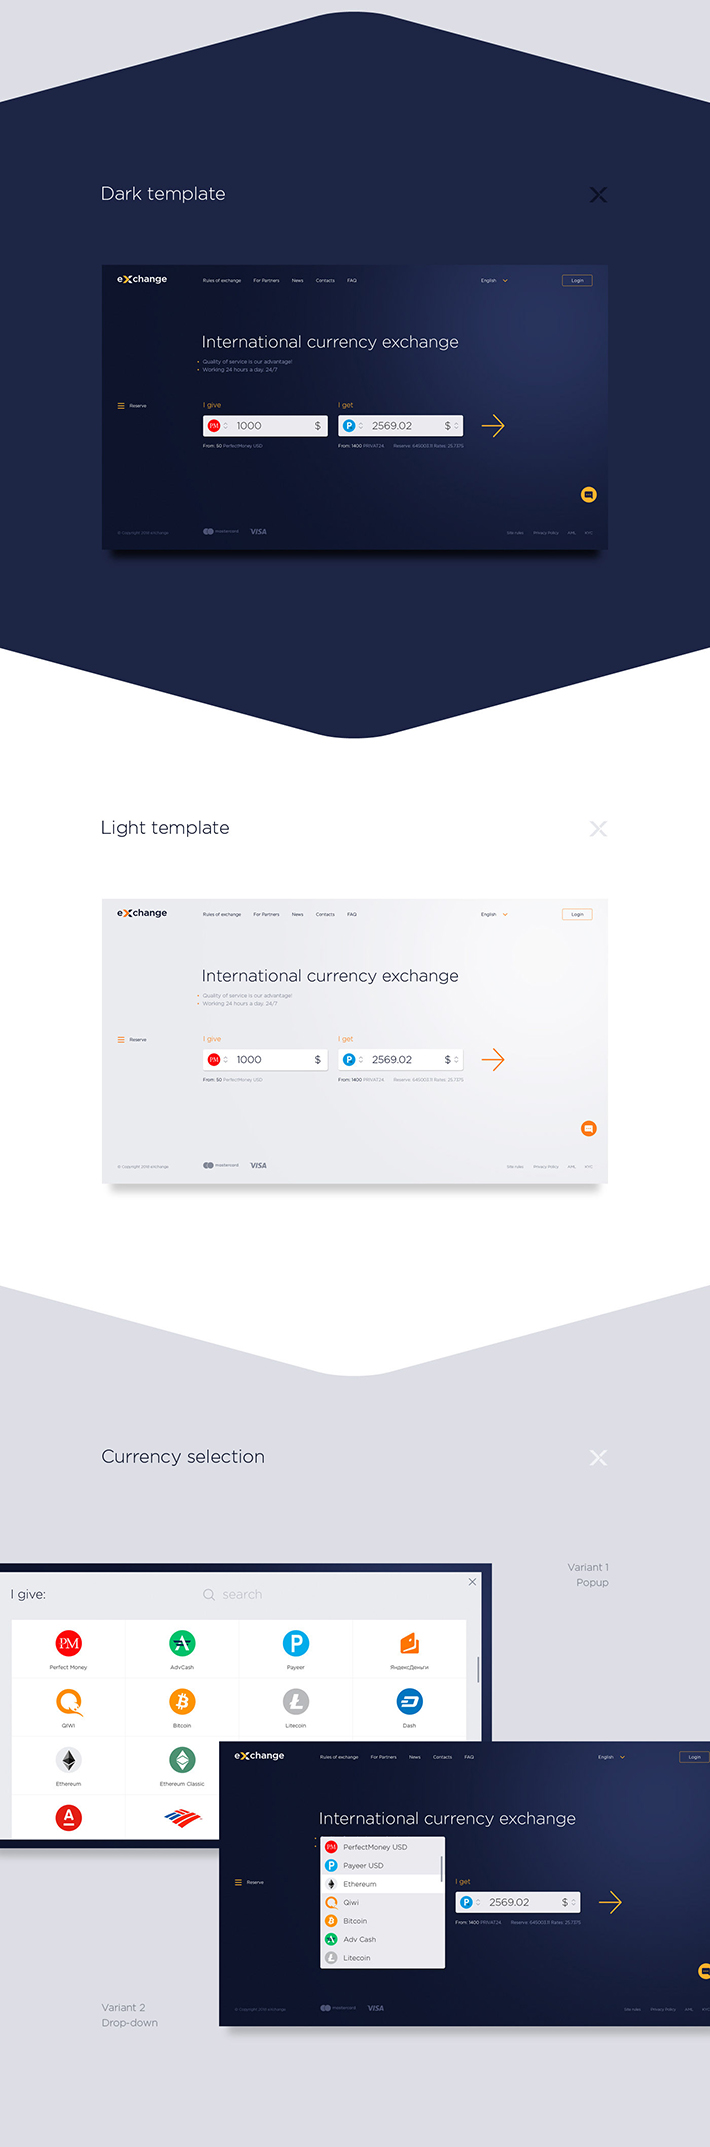 Free Currency exchange Web Designing Template Free Download (PSD)